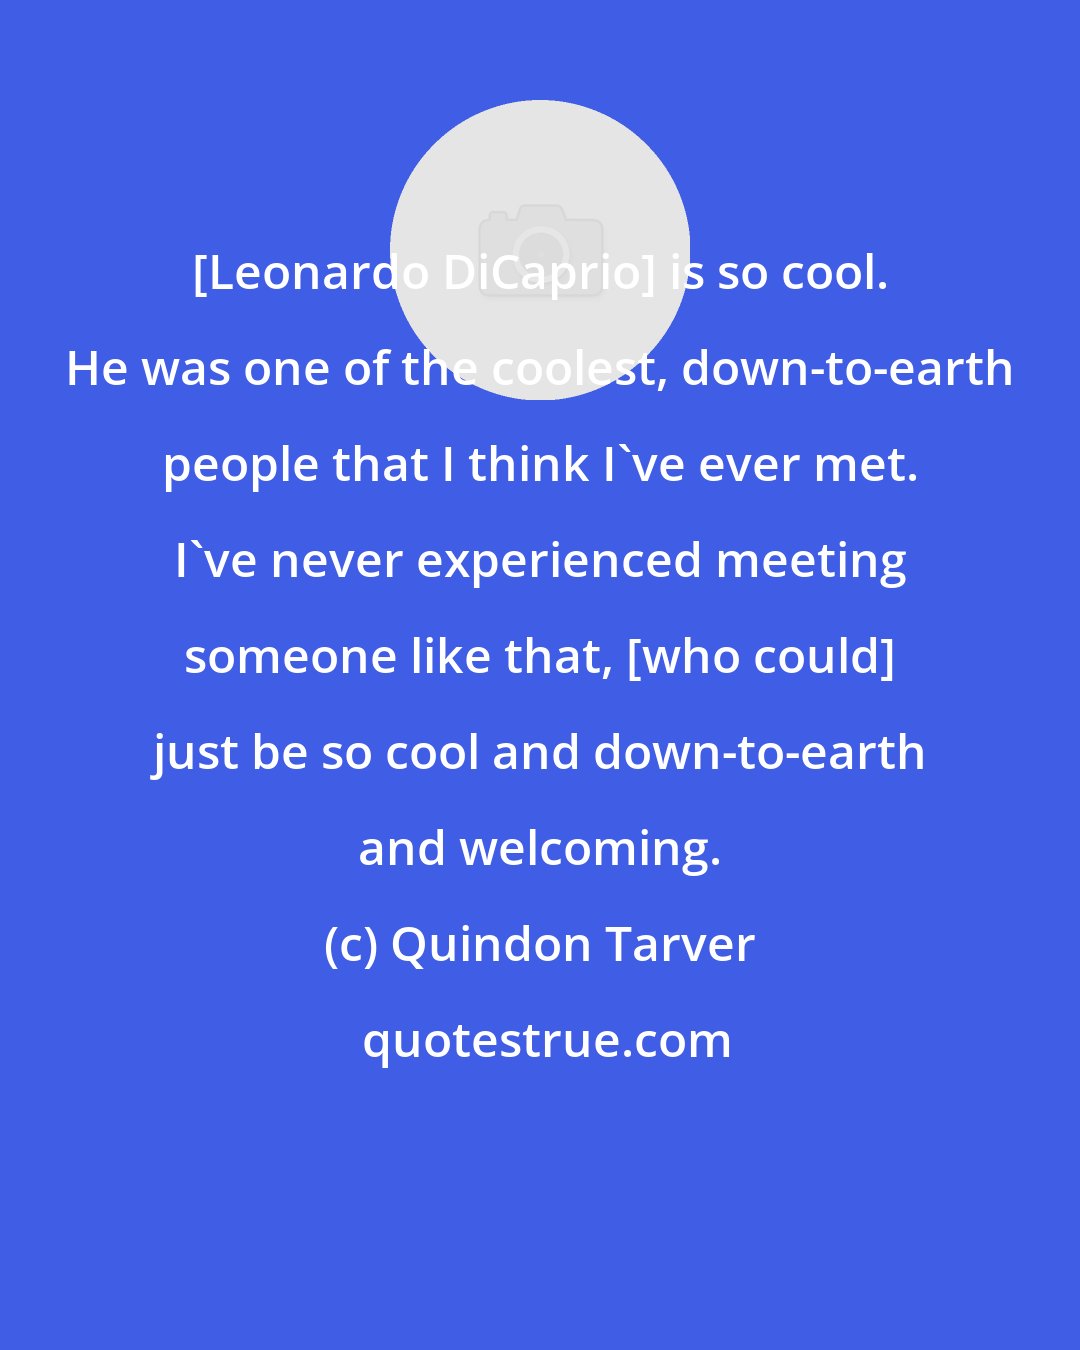 Quindon Tarver: [Leonardo DiCaprio] is so cool. He was one of the coolest, down-to-earth people that I think I've ever met. I've never experienced meeting someone like that, [who could] just be so cool and down-to-earth and welcoming.